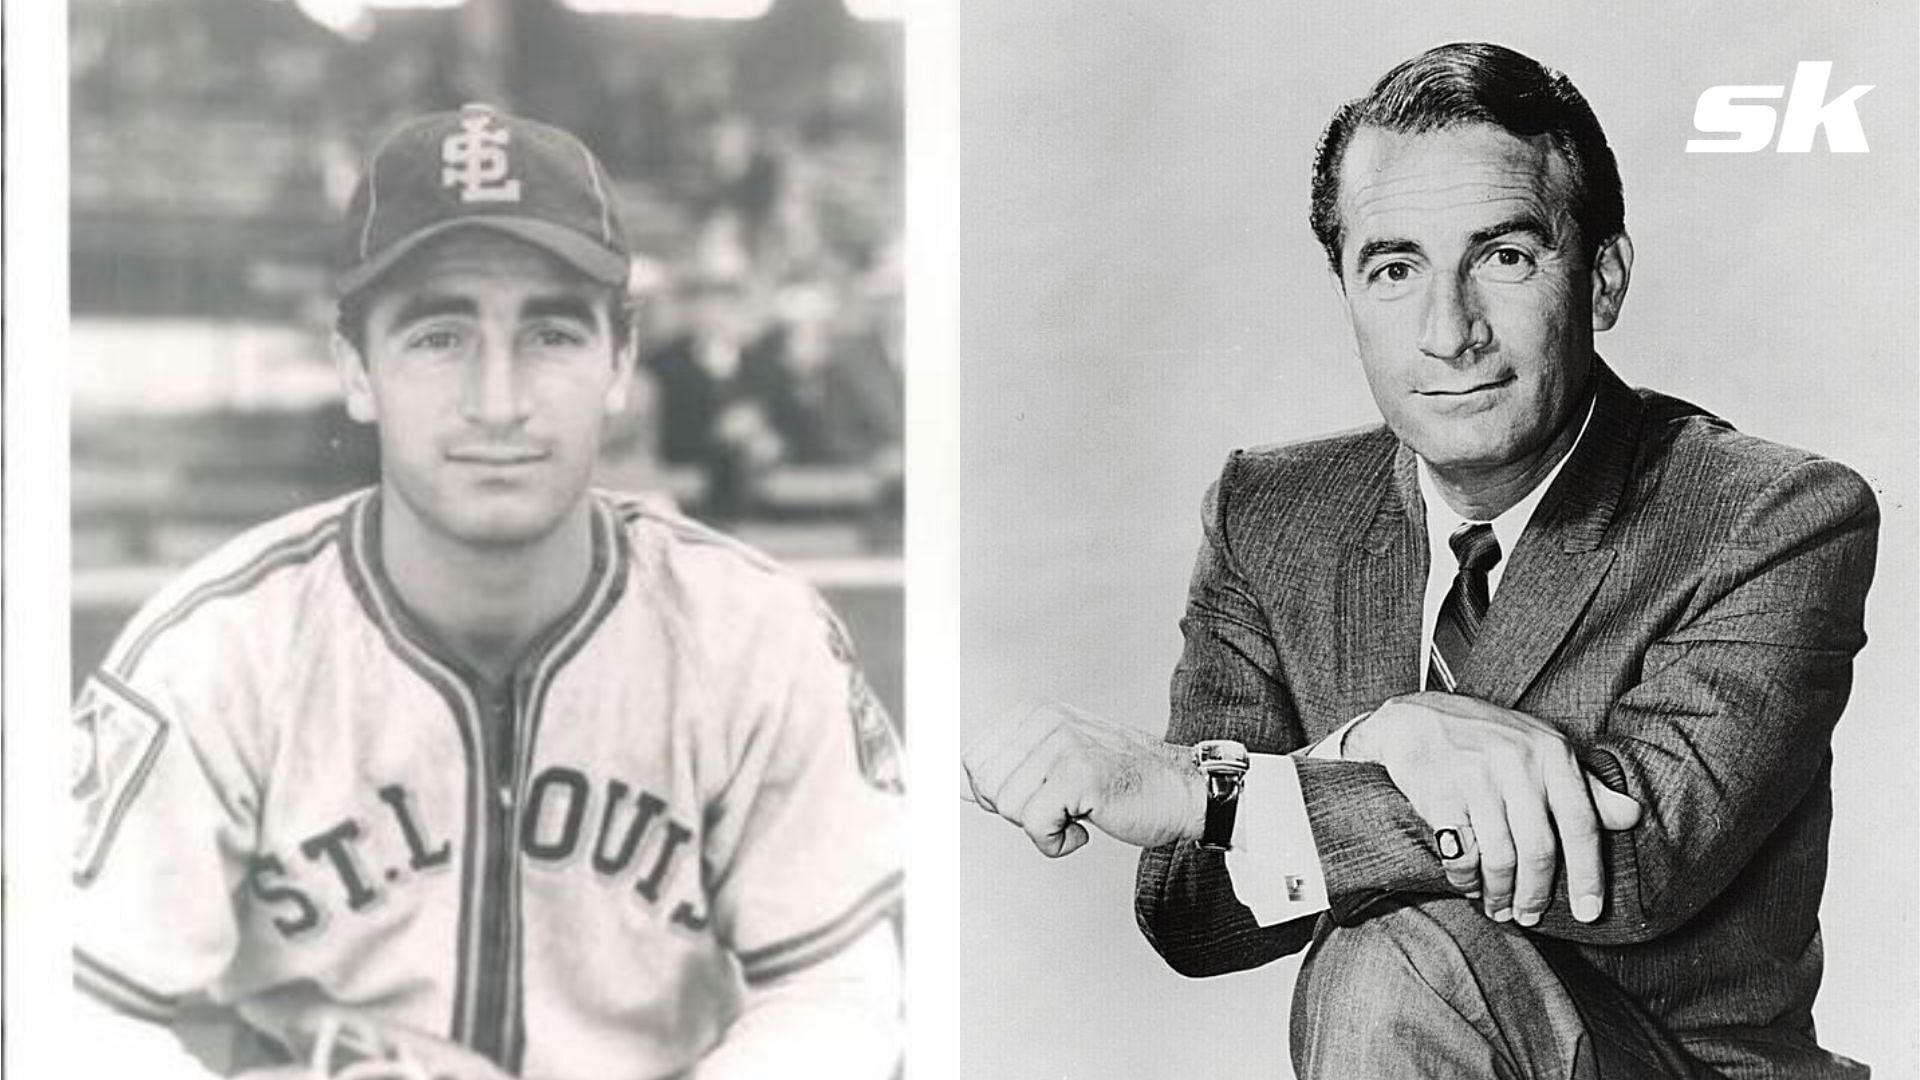 From World Series champion to Soap Opera Star, John Beradino lived two dream lives